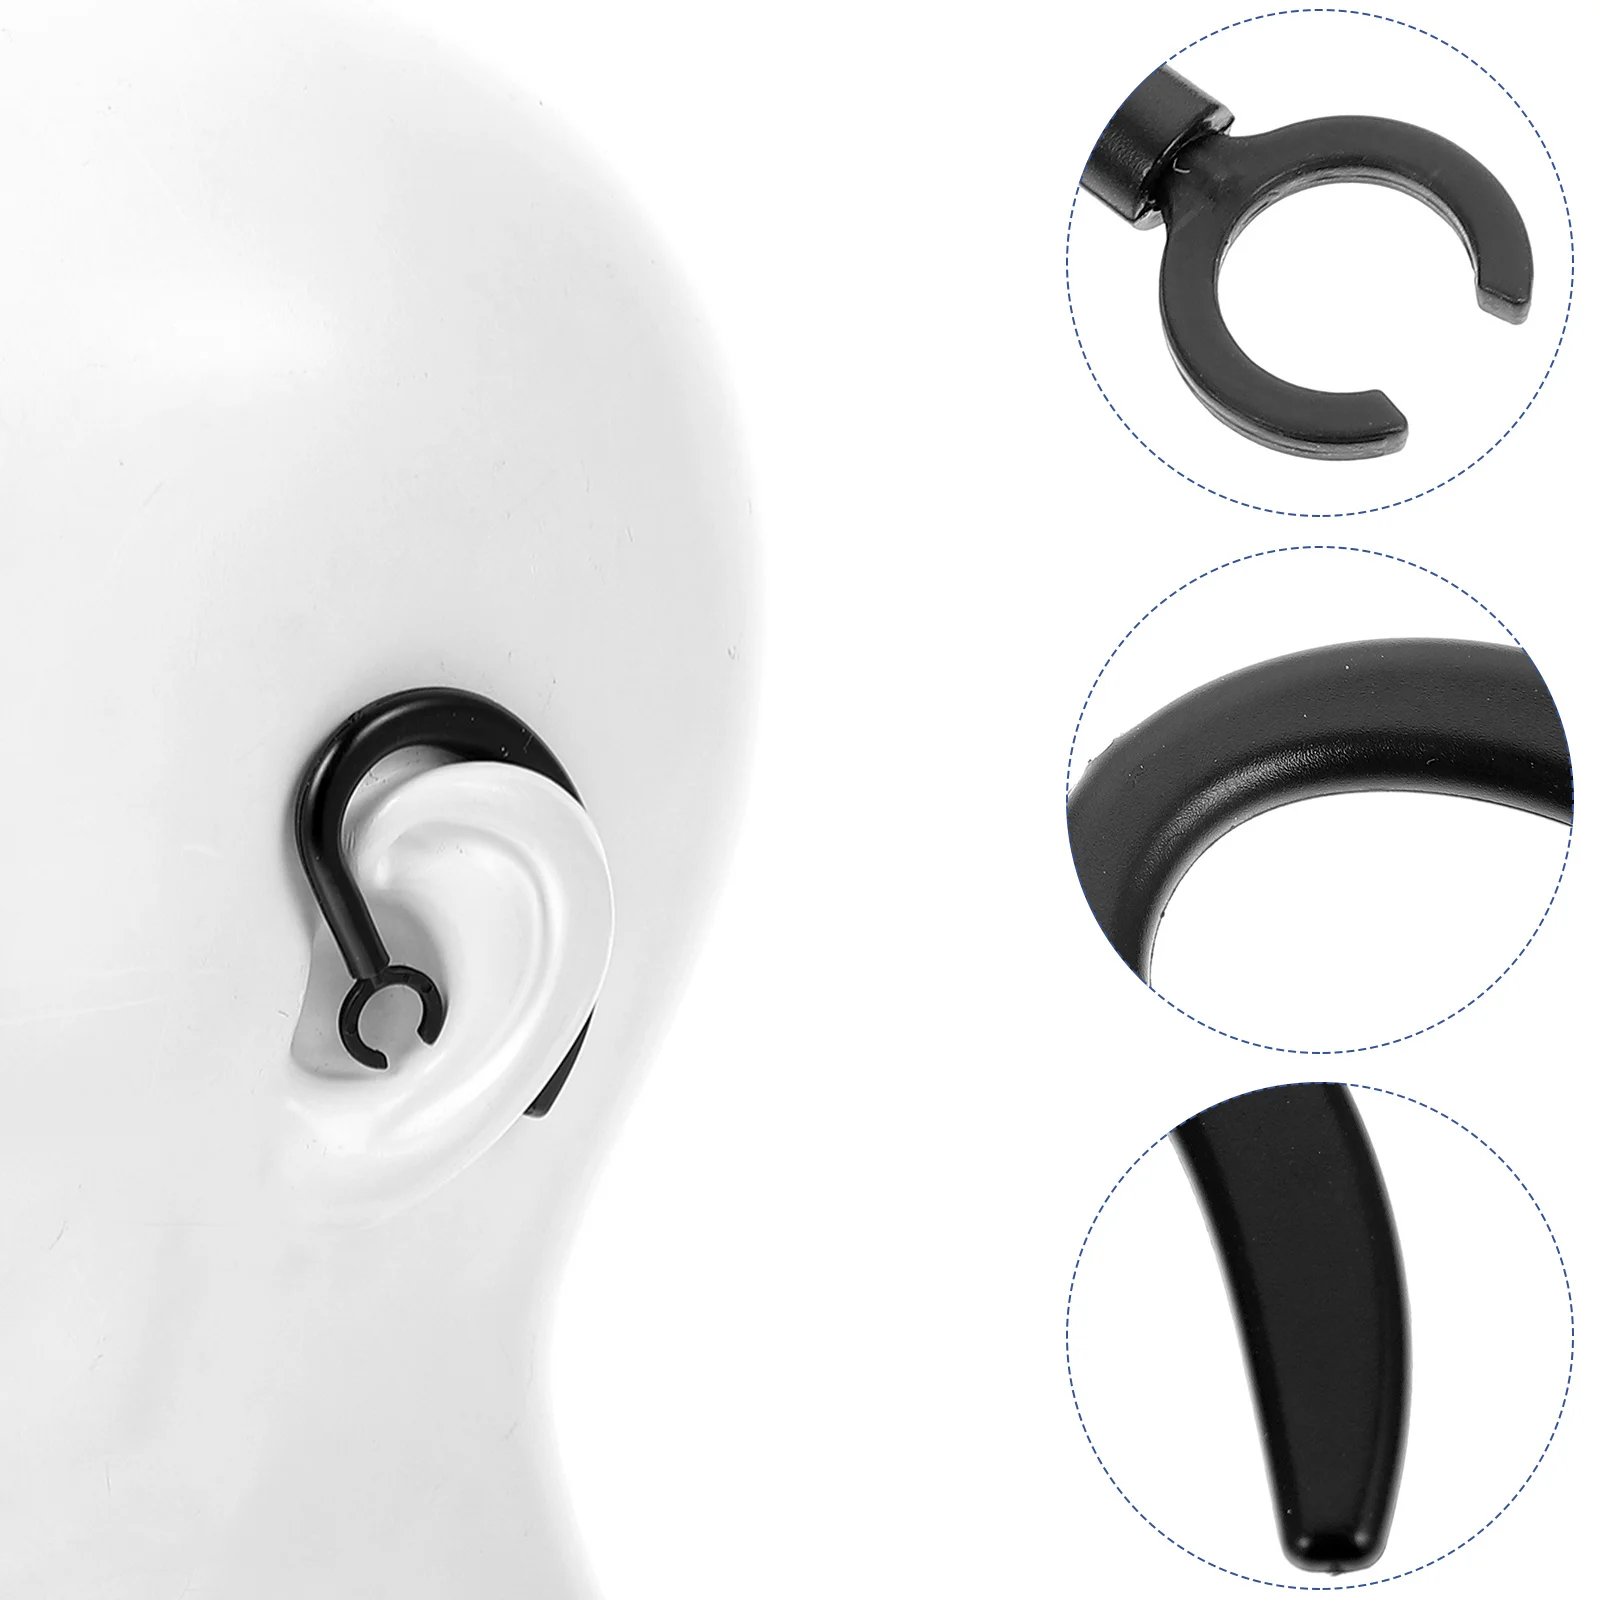 

2 Pcs Headset Earhook Hooks for Earbuds Clamp Headphones Silicone Plugs Rubber Earpiece Replacement Anti-lost Sports